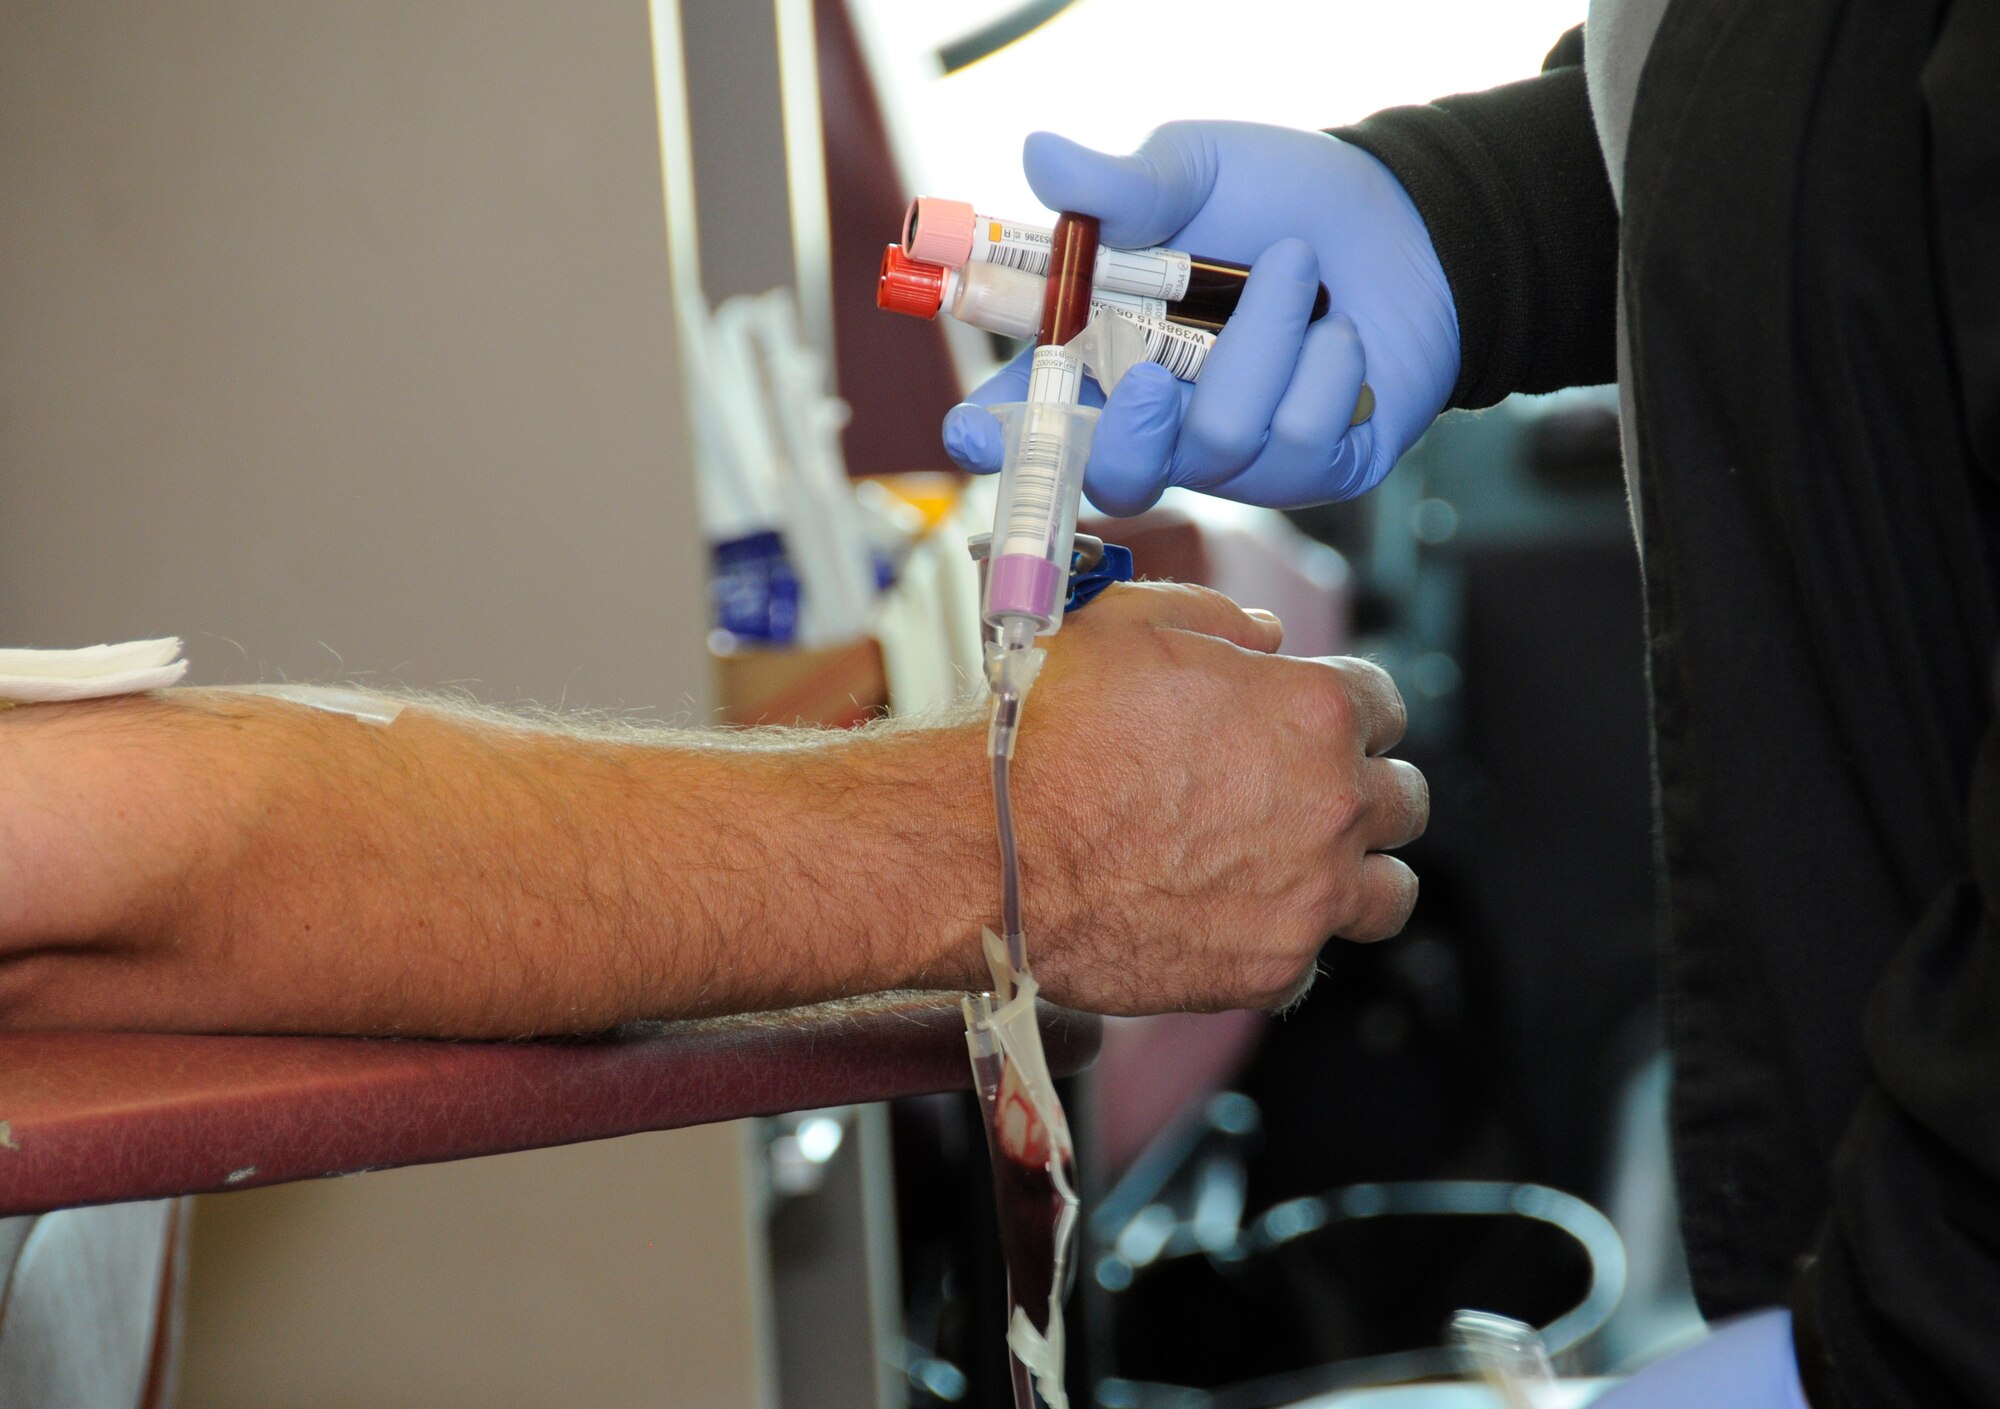 A nurse uses a vial to collect blood being donated by U. S. Air Force Master Sgt. Todd Latour, 145th Civil Engineer Squadron, during a blood drive held at the North Carolina Air National Guard base, Charlotte Douglas Intl. Airport, April 18, 2015. Community Blood Center of the Carolinas is an organization that supplies blood to local hospitals in the Charlotte area. Donating one pint takes an hour or less, and in the end one walks away having saved up to three lives.  (U.S. Air National Guard photo by Master Sgt. Patricia F. Moran, 145th Public Affairs/Released)